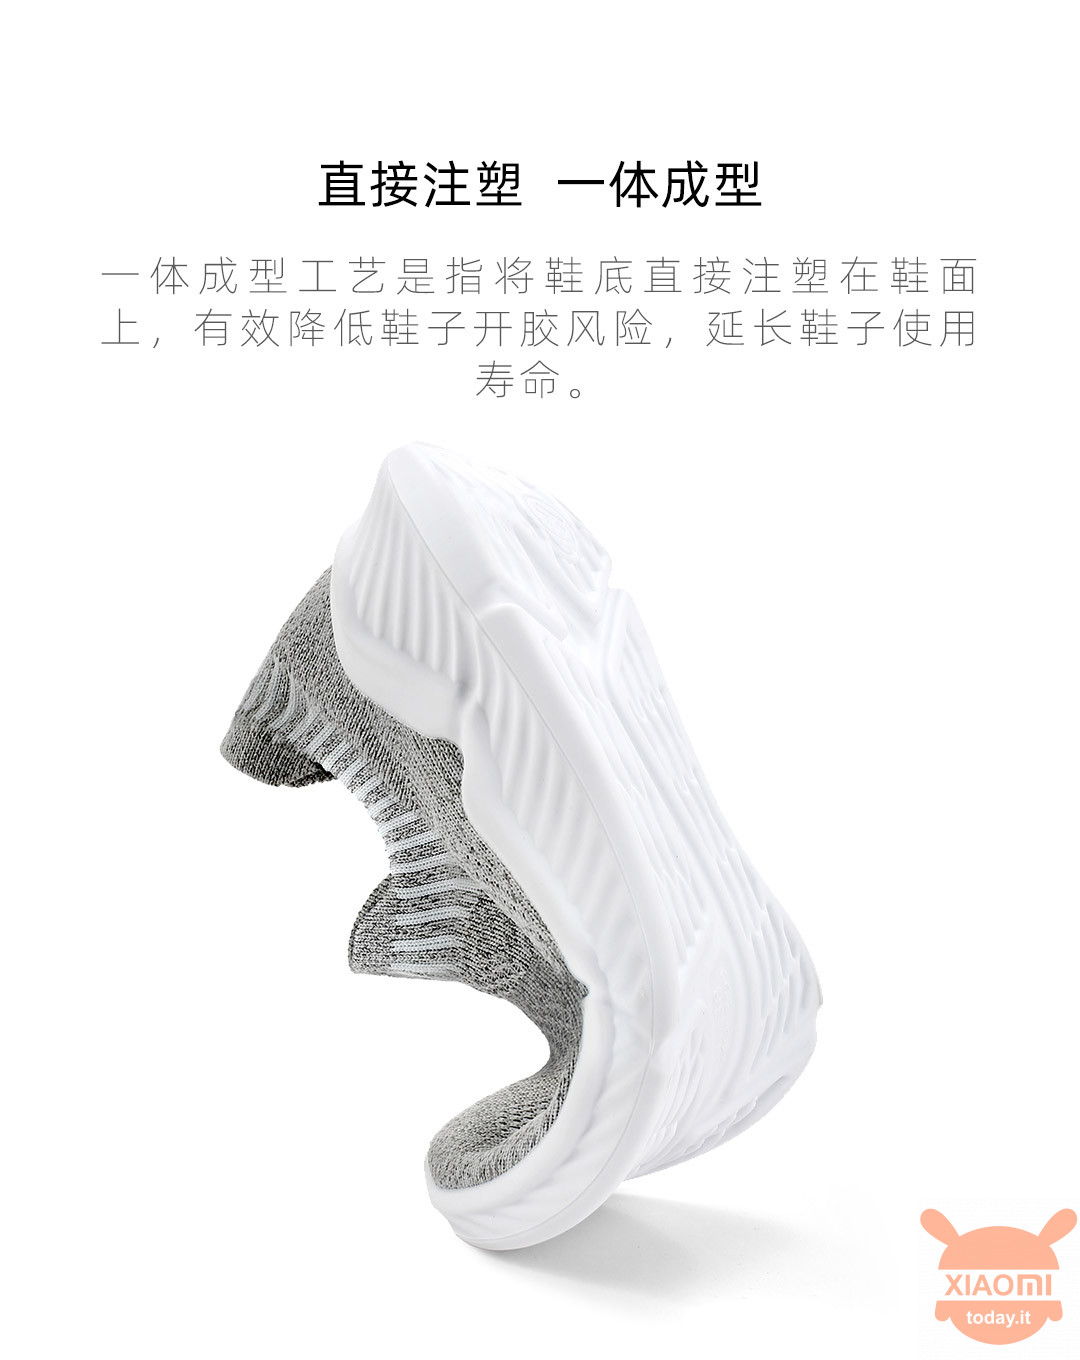 Xiaomi launches new FREETIE shoes: ultralight and with waterproof and ...